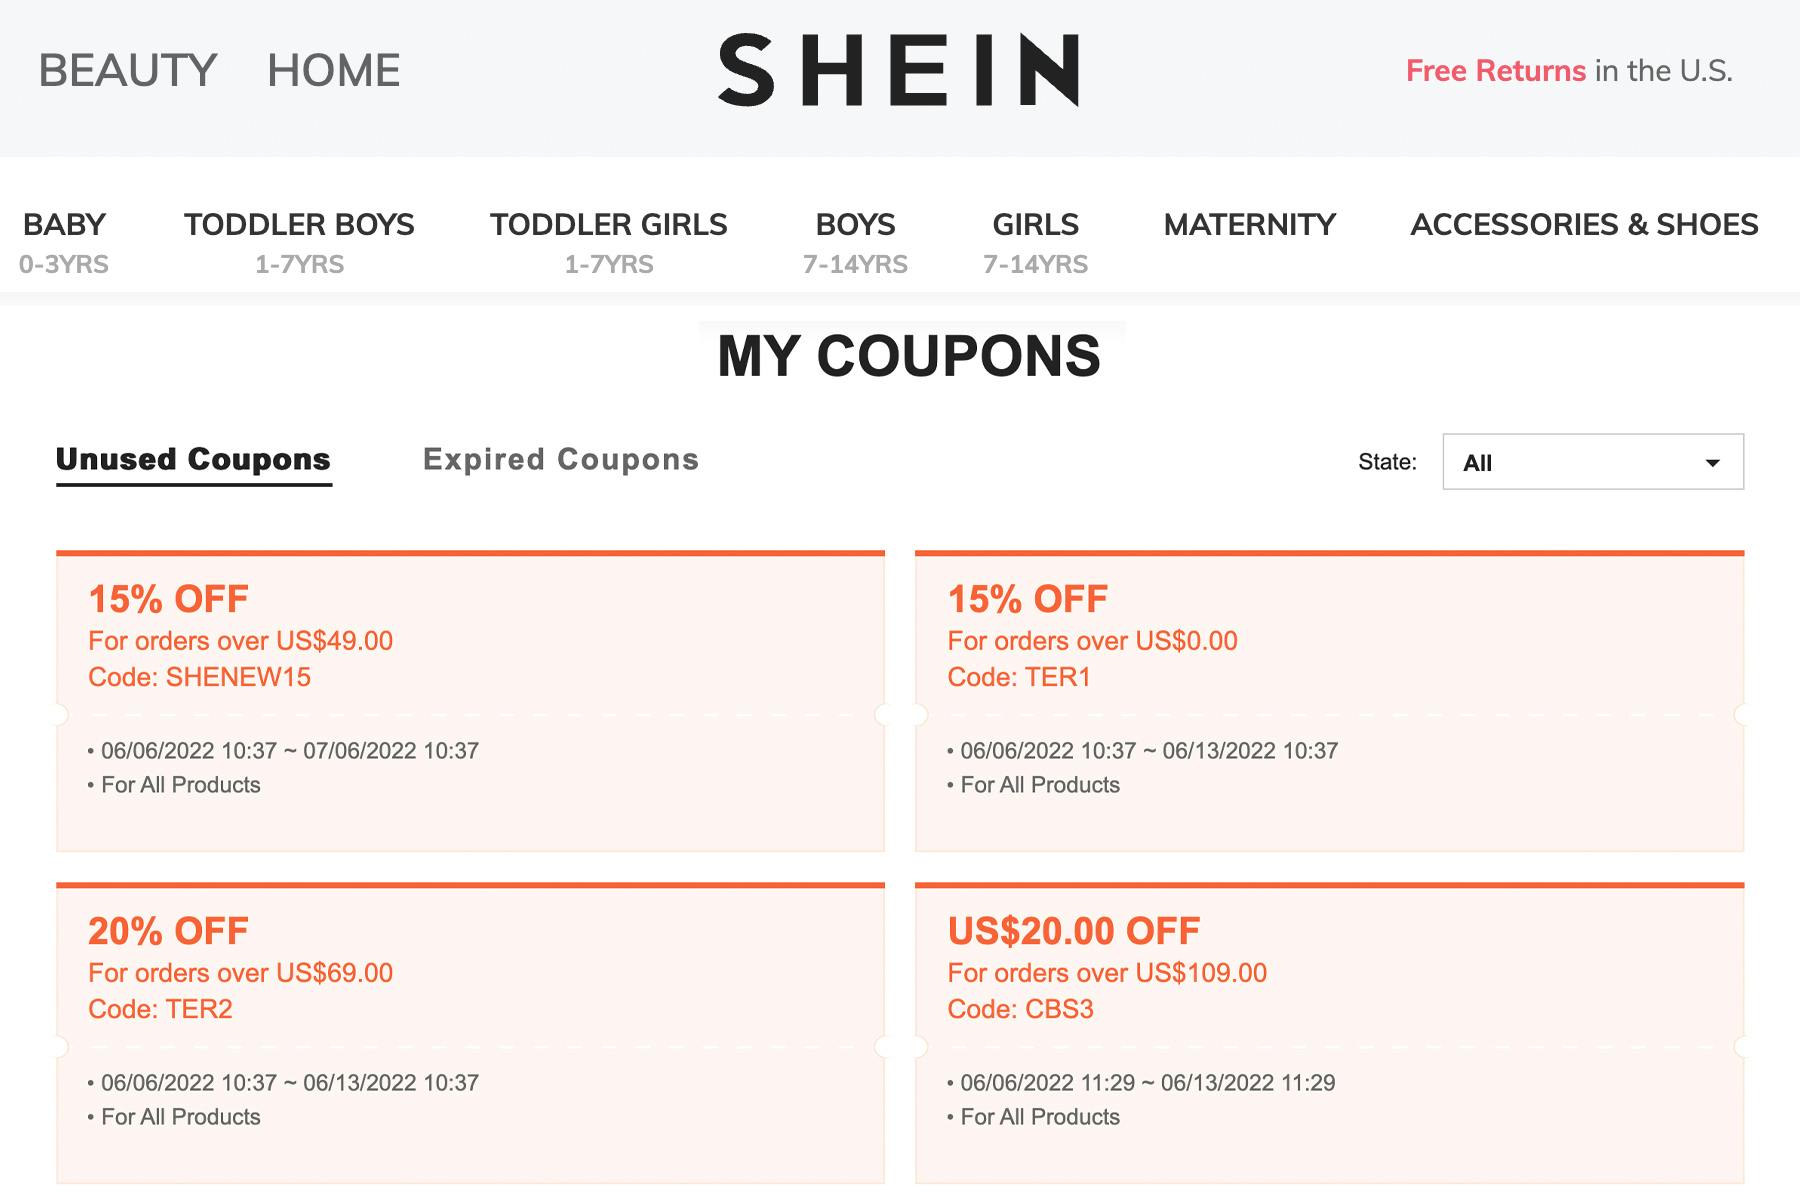 How To Get Deep Discounts on SheIn Clothing The Krazy Coupon Lady